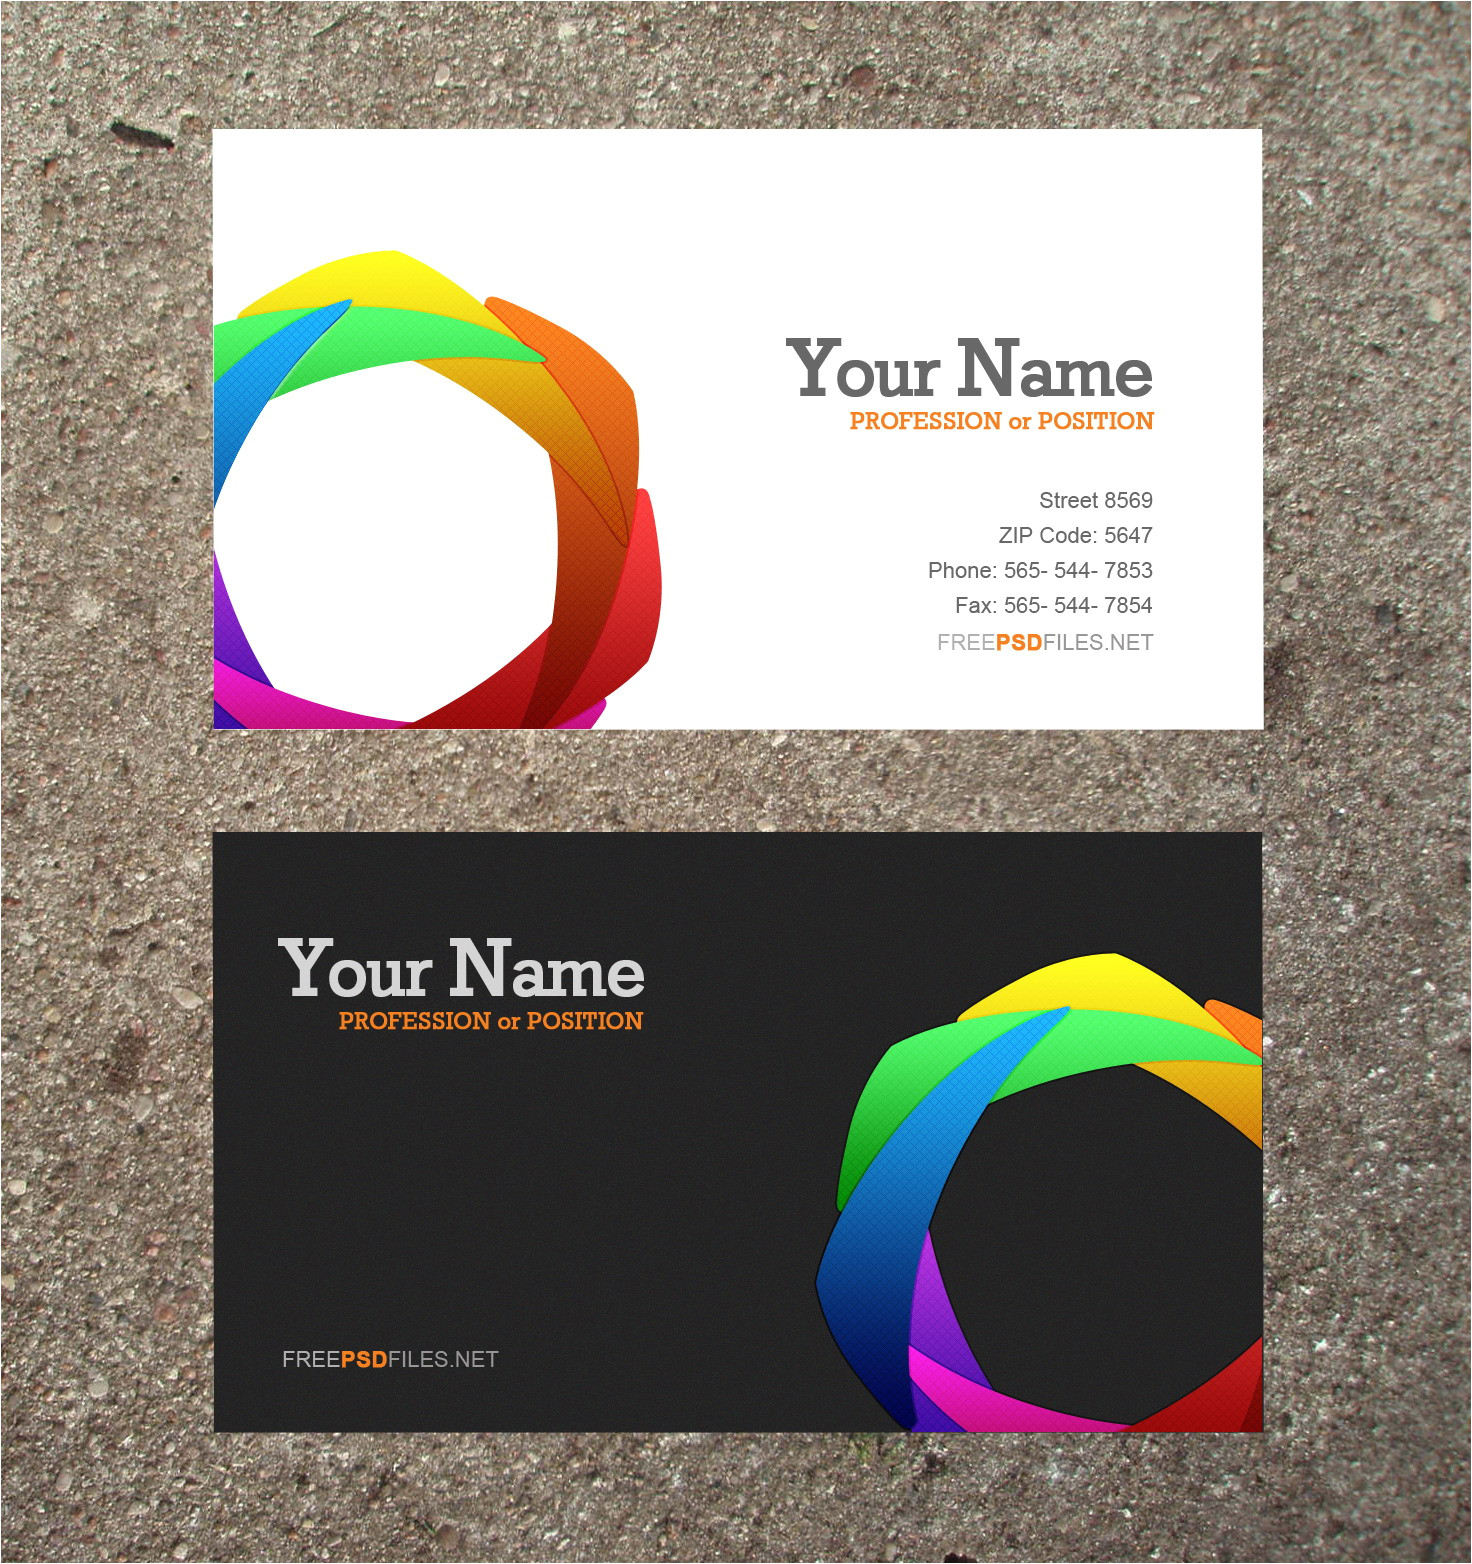 Busniess Card Template 10 Modern Business Card Psd Template Free Images Free